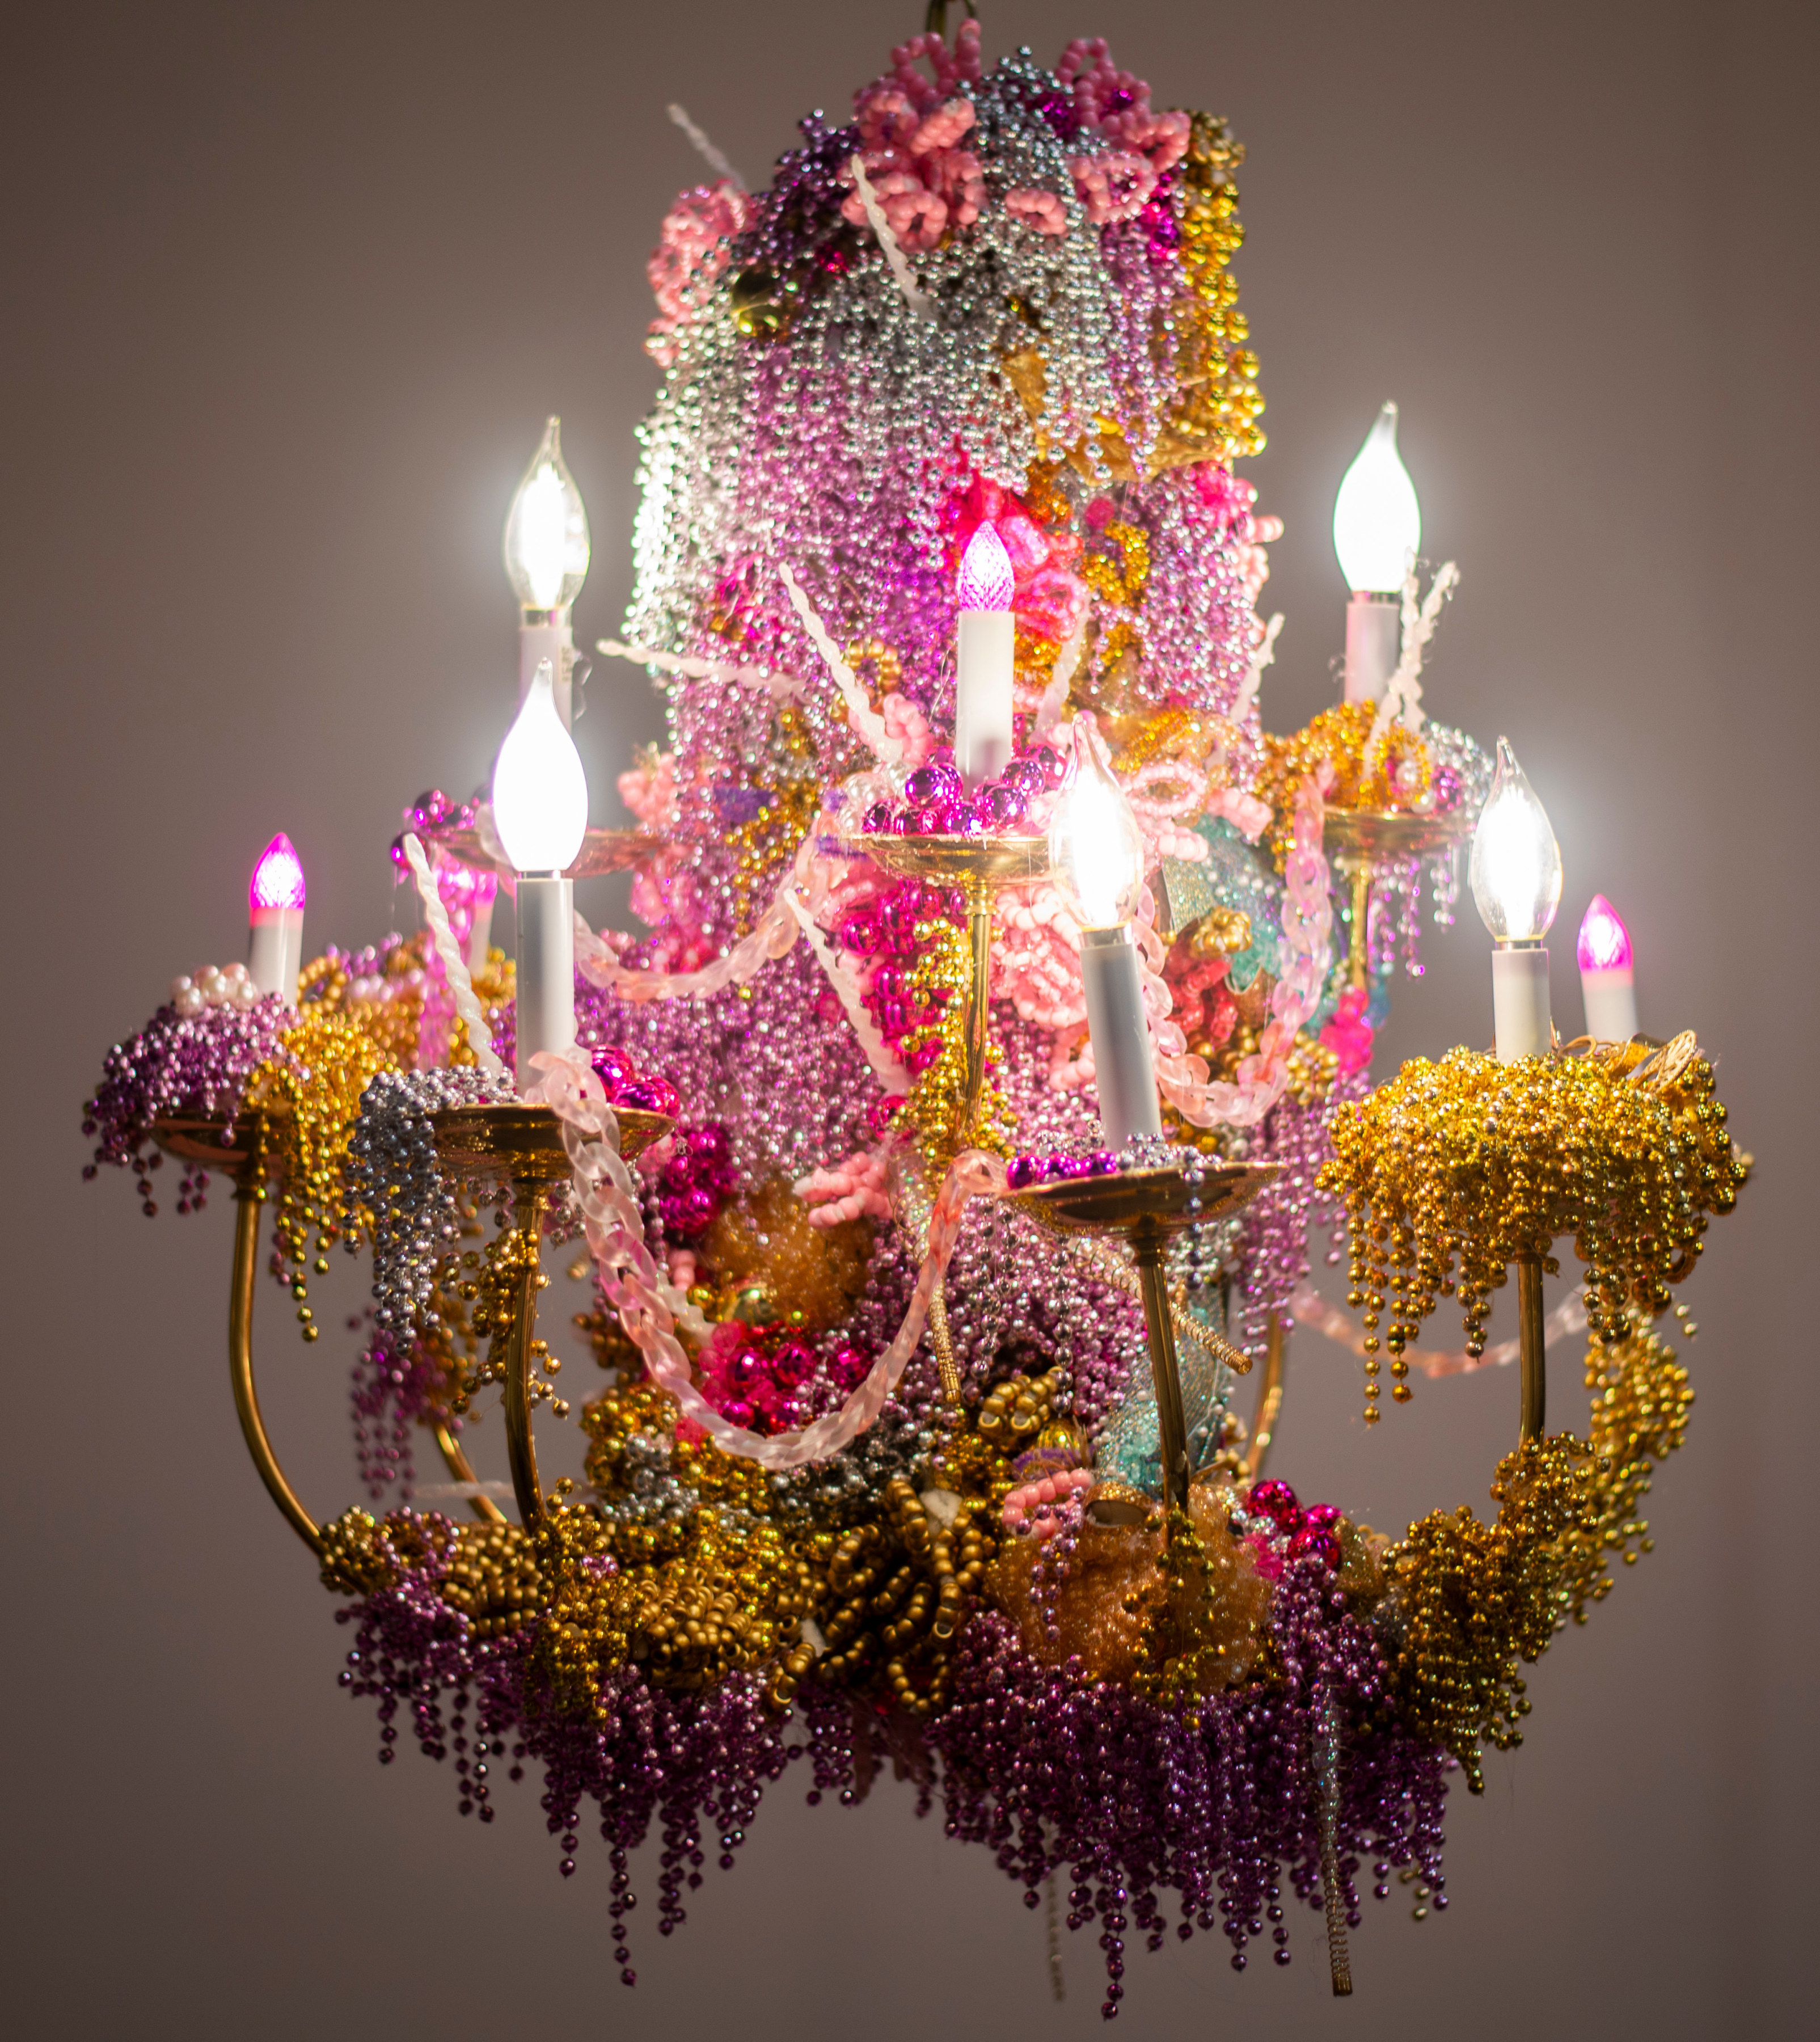 A chandelier made by Jenny Day coated with Mardi Gras beads and sequins, emitting a warm glow from its electric candles.